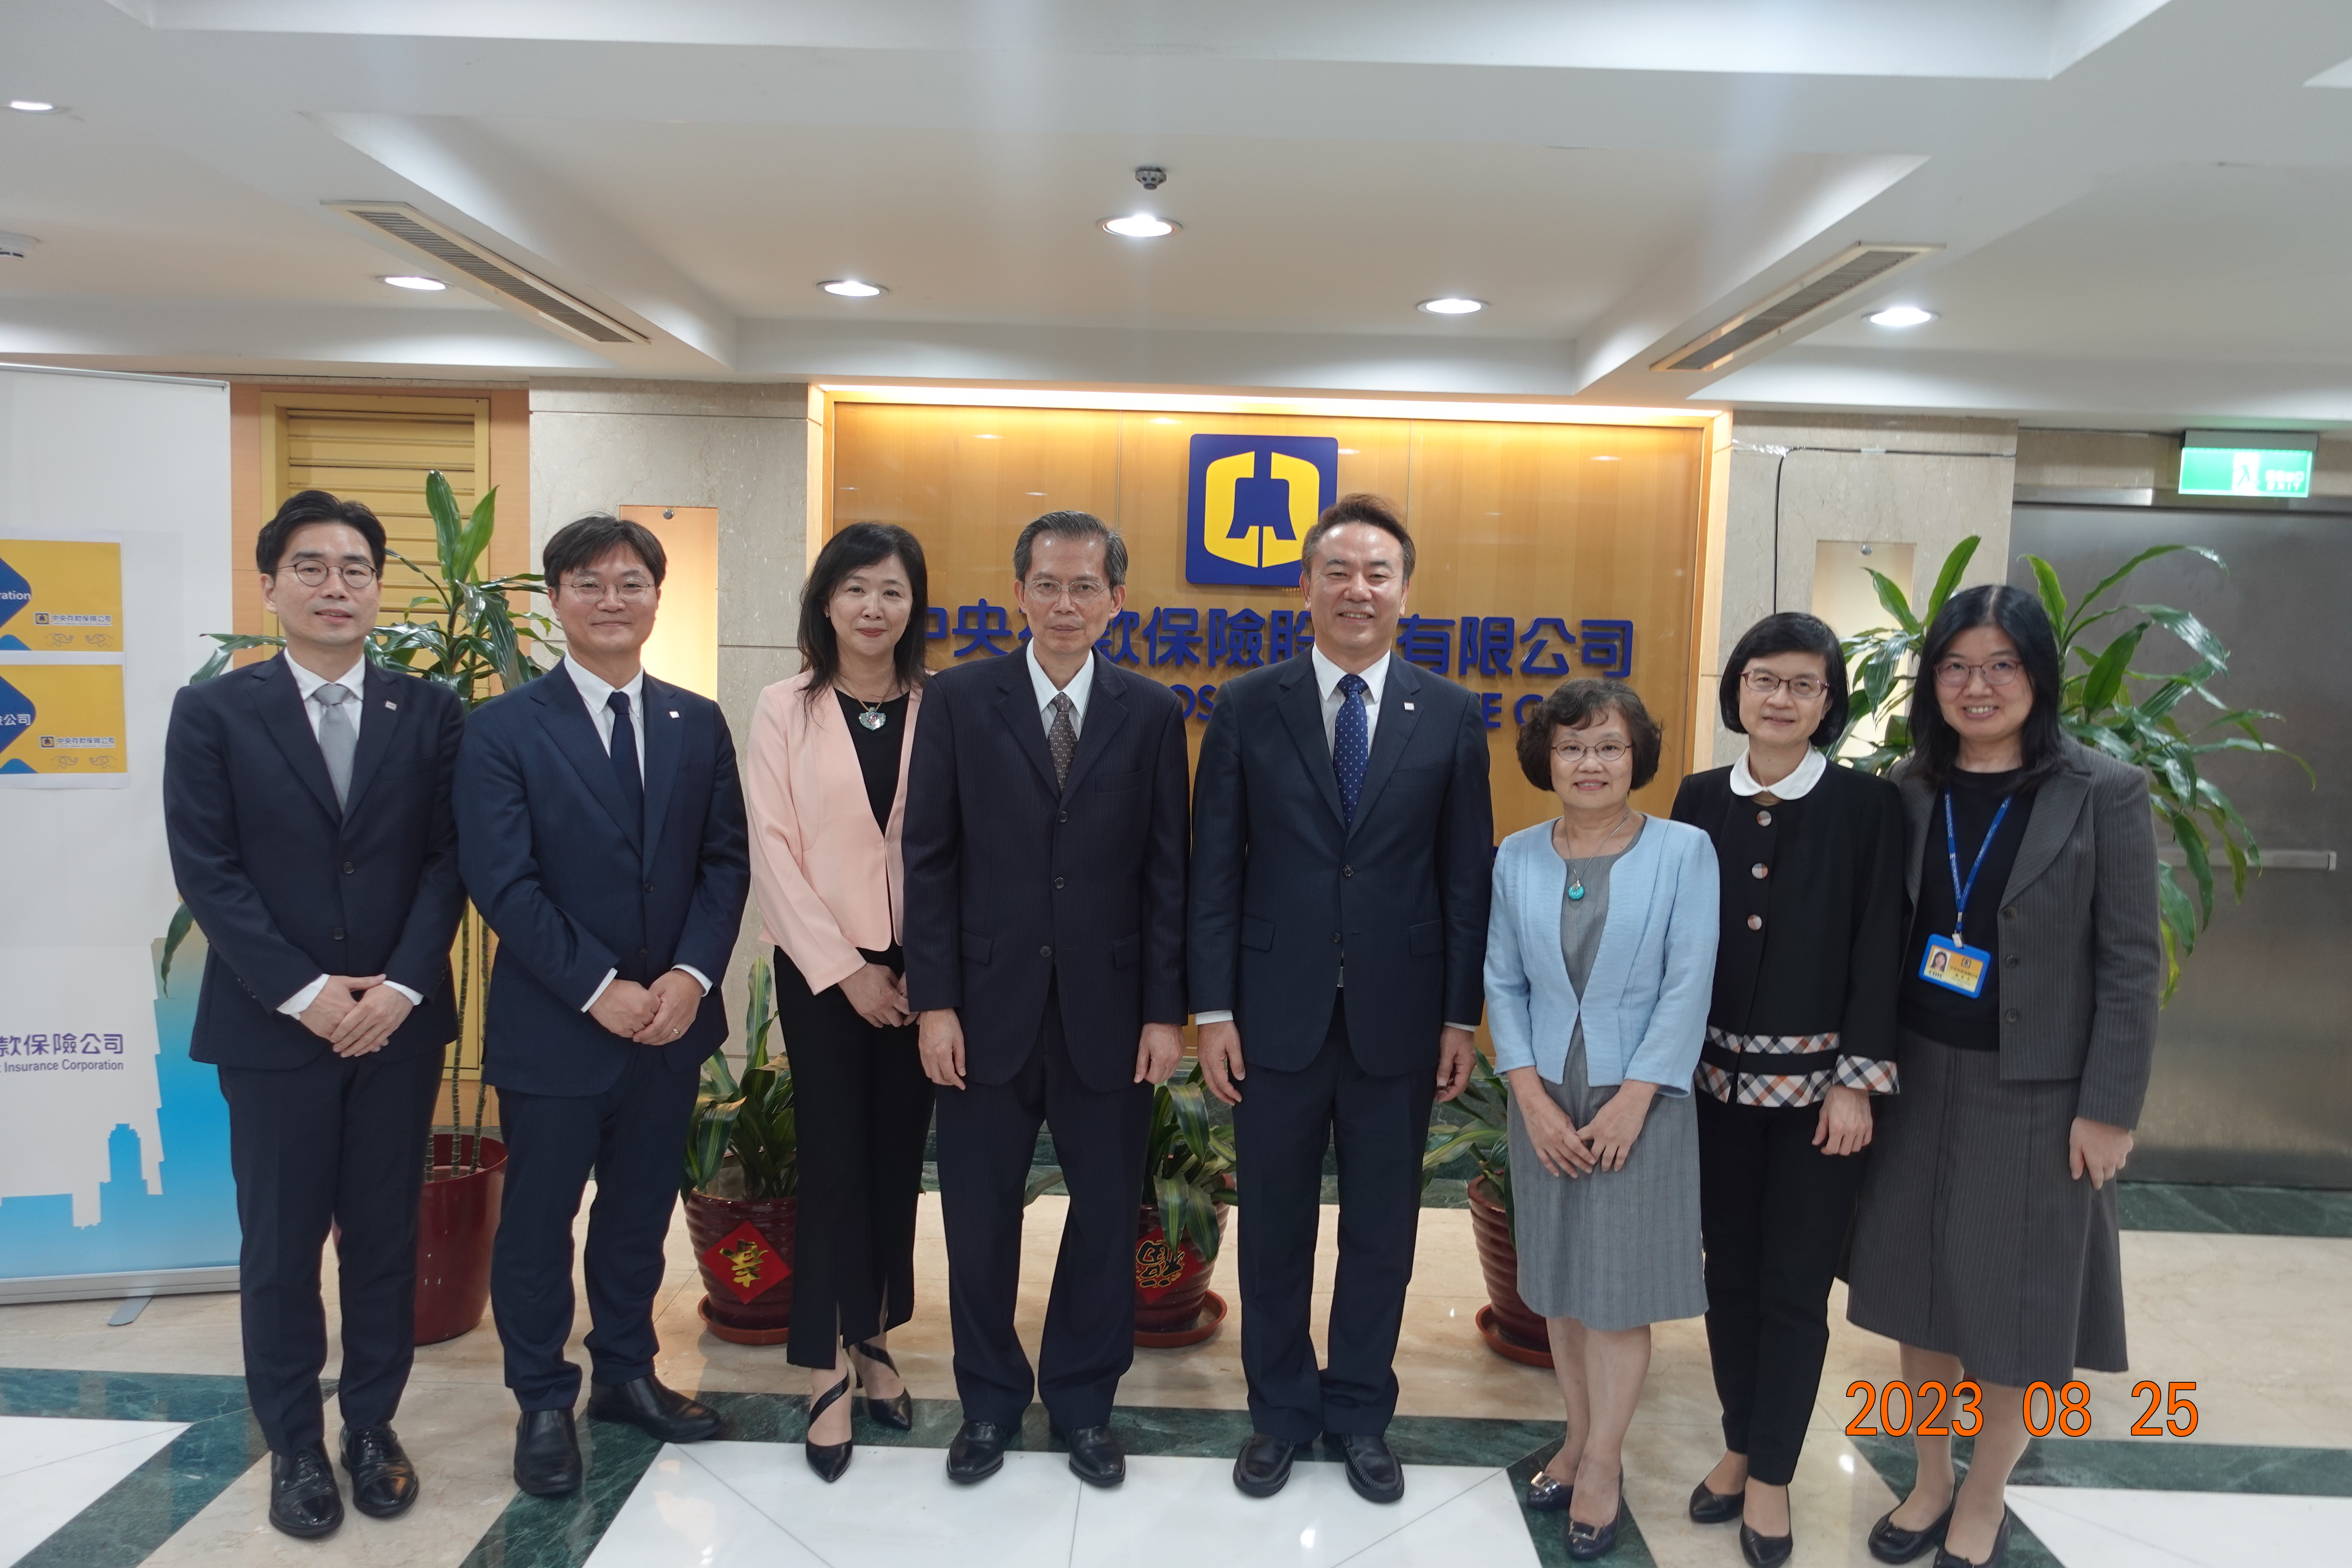 Korea Deposit Insurance Corporation  visited the CDIC on 25 August 2023